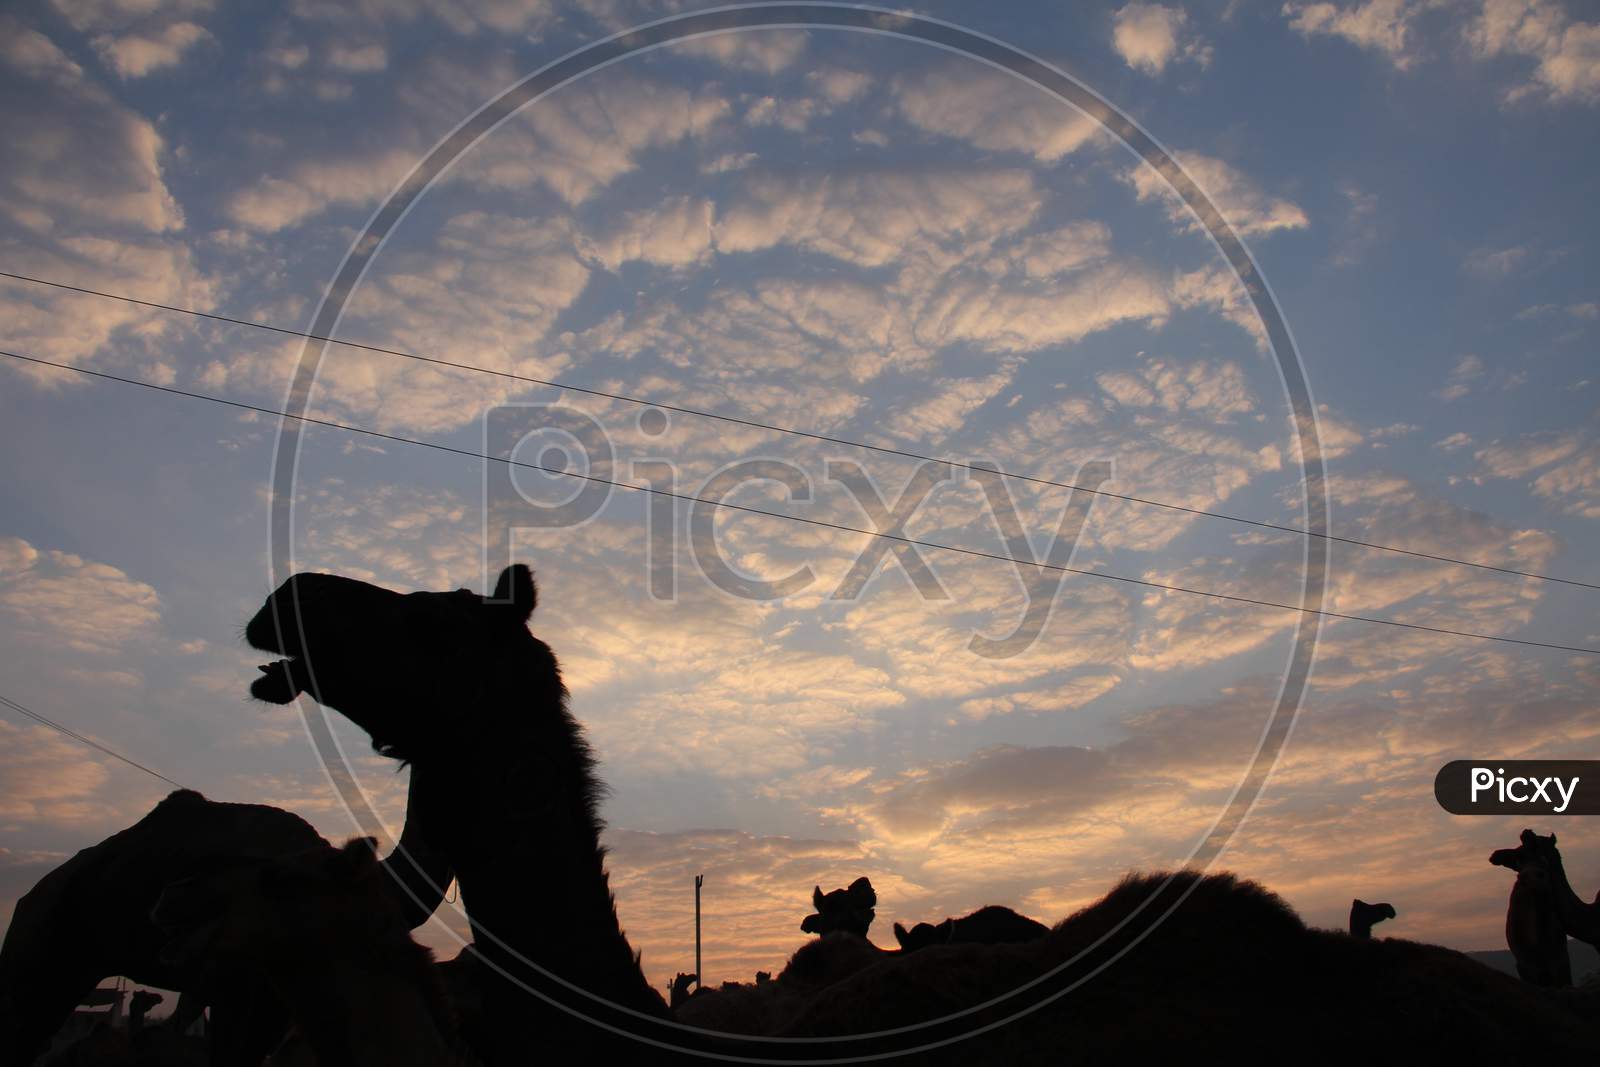 Silhouette of Camels In Pushkar Camel Fair Over a Sunset Sky, Rajasthan